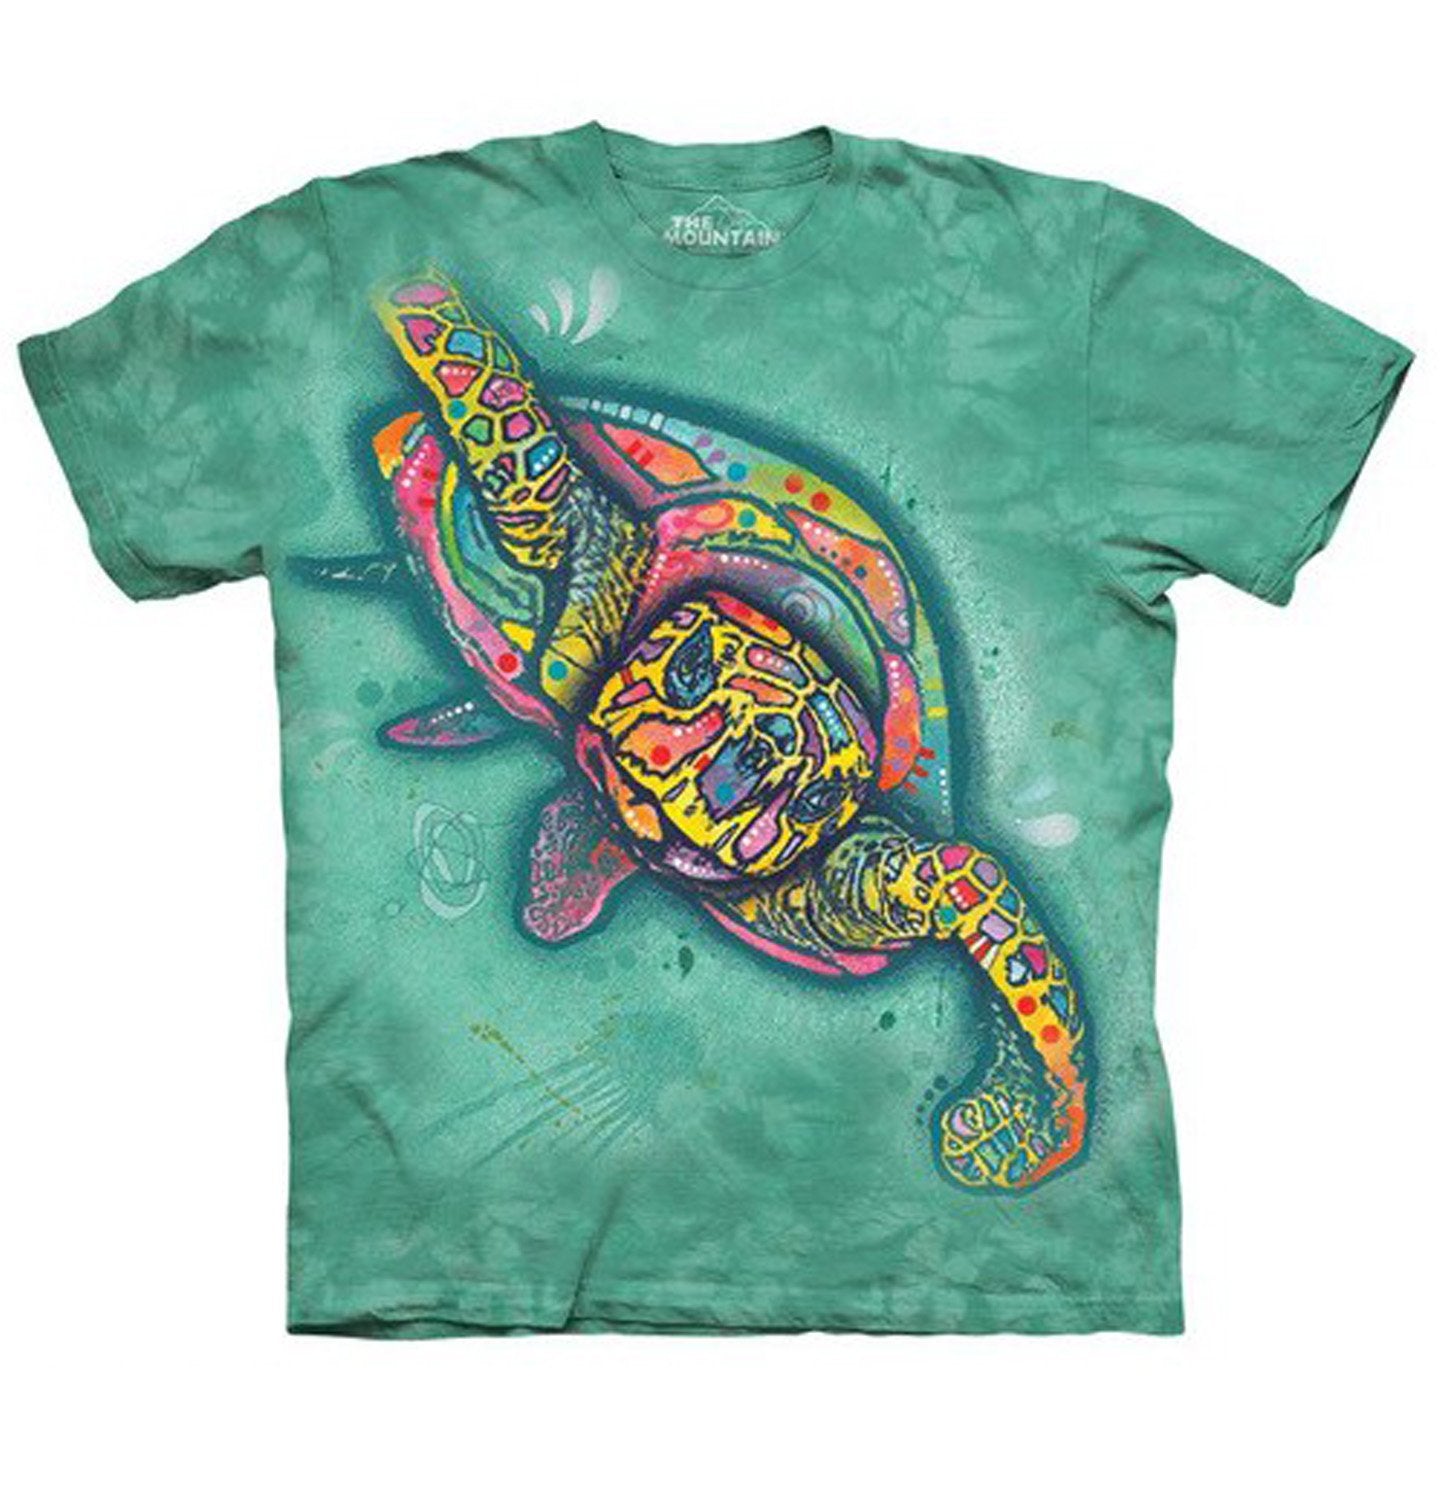 The Mountain - Russo Turtle - Adult Unisex T-Shirt